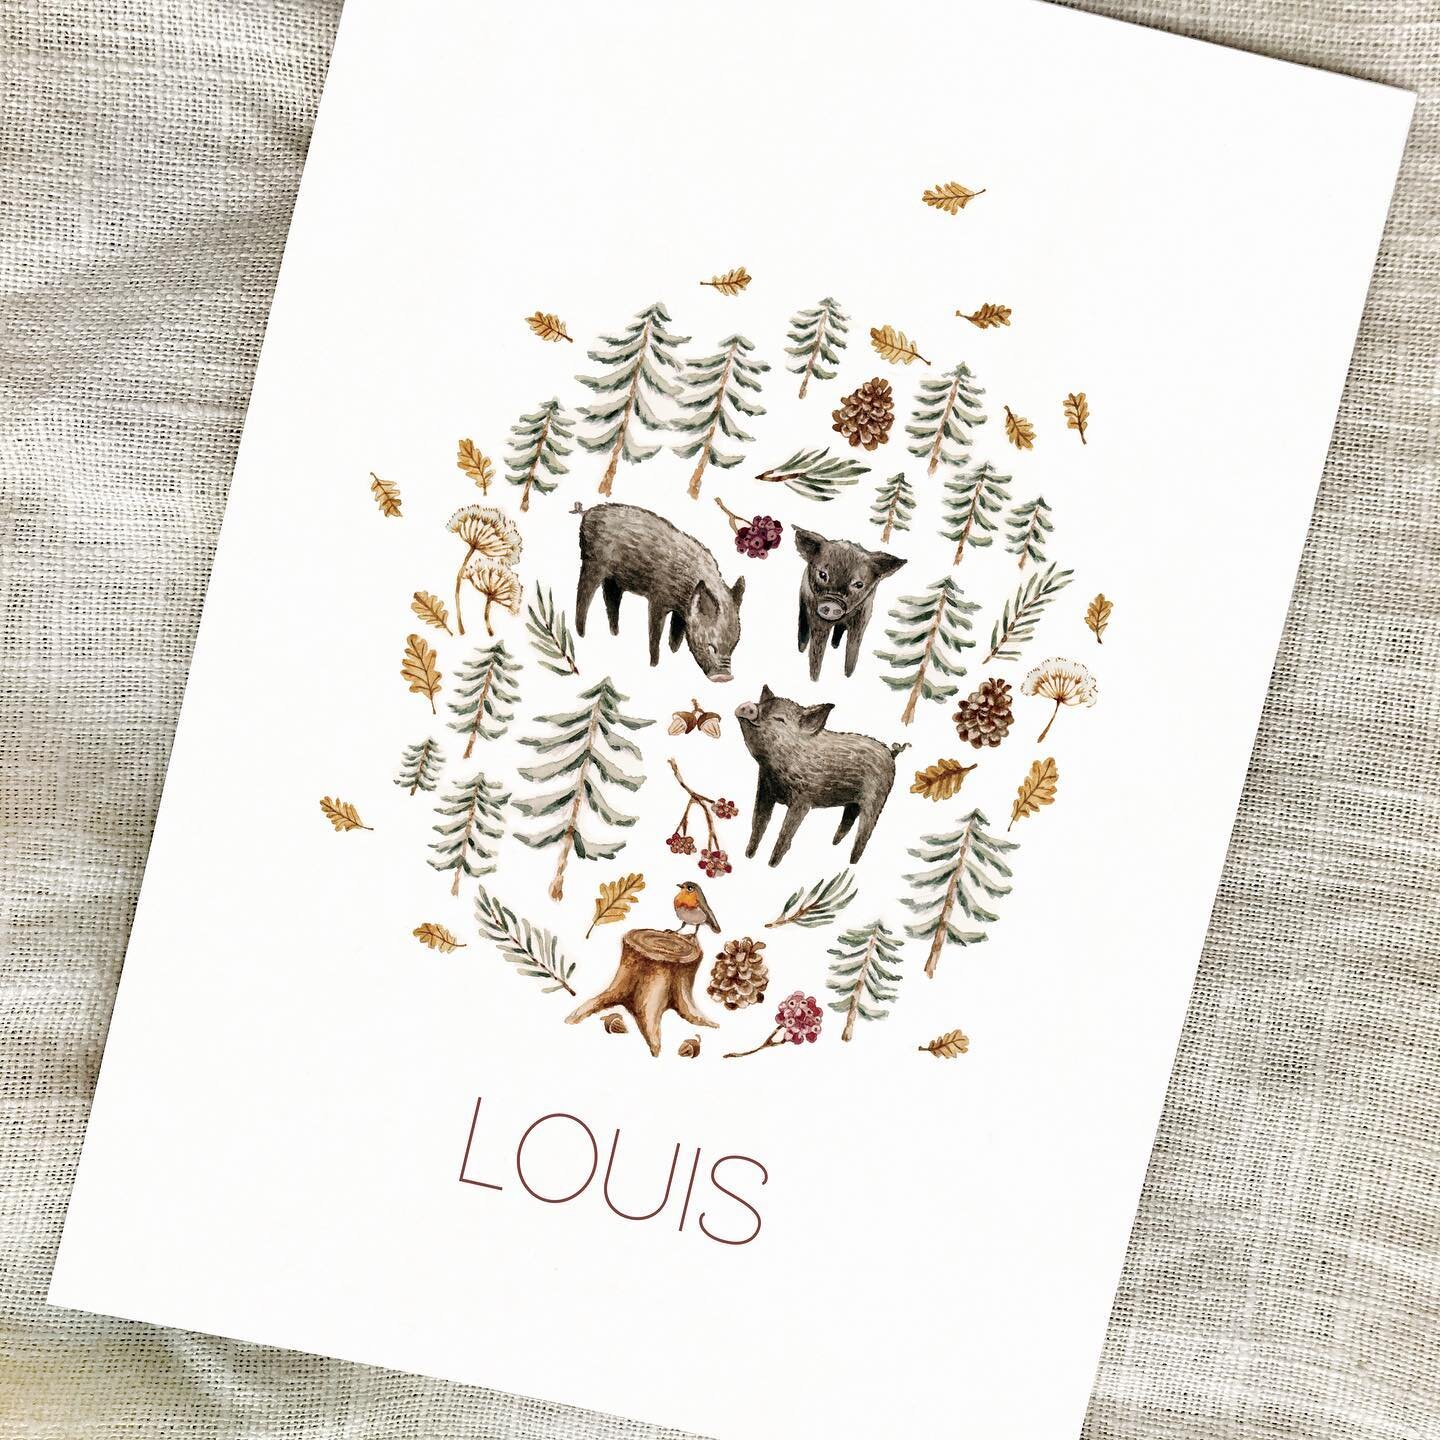 Custommade birthannouncement card for sweet Louis.
I always wanted to paint little piggies, so when his parents asked me to design a birthannouncement with three pigs that represents their three children I was very pleased !
There&rsquo;s a beautiful